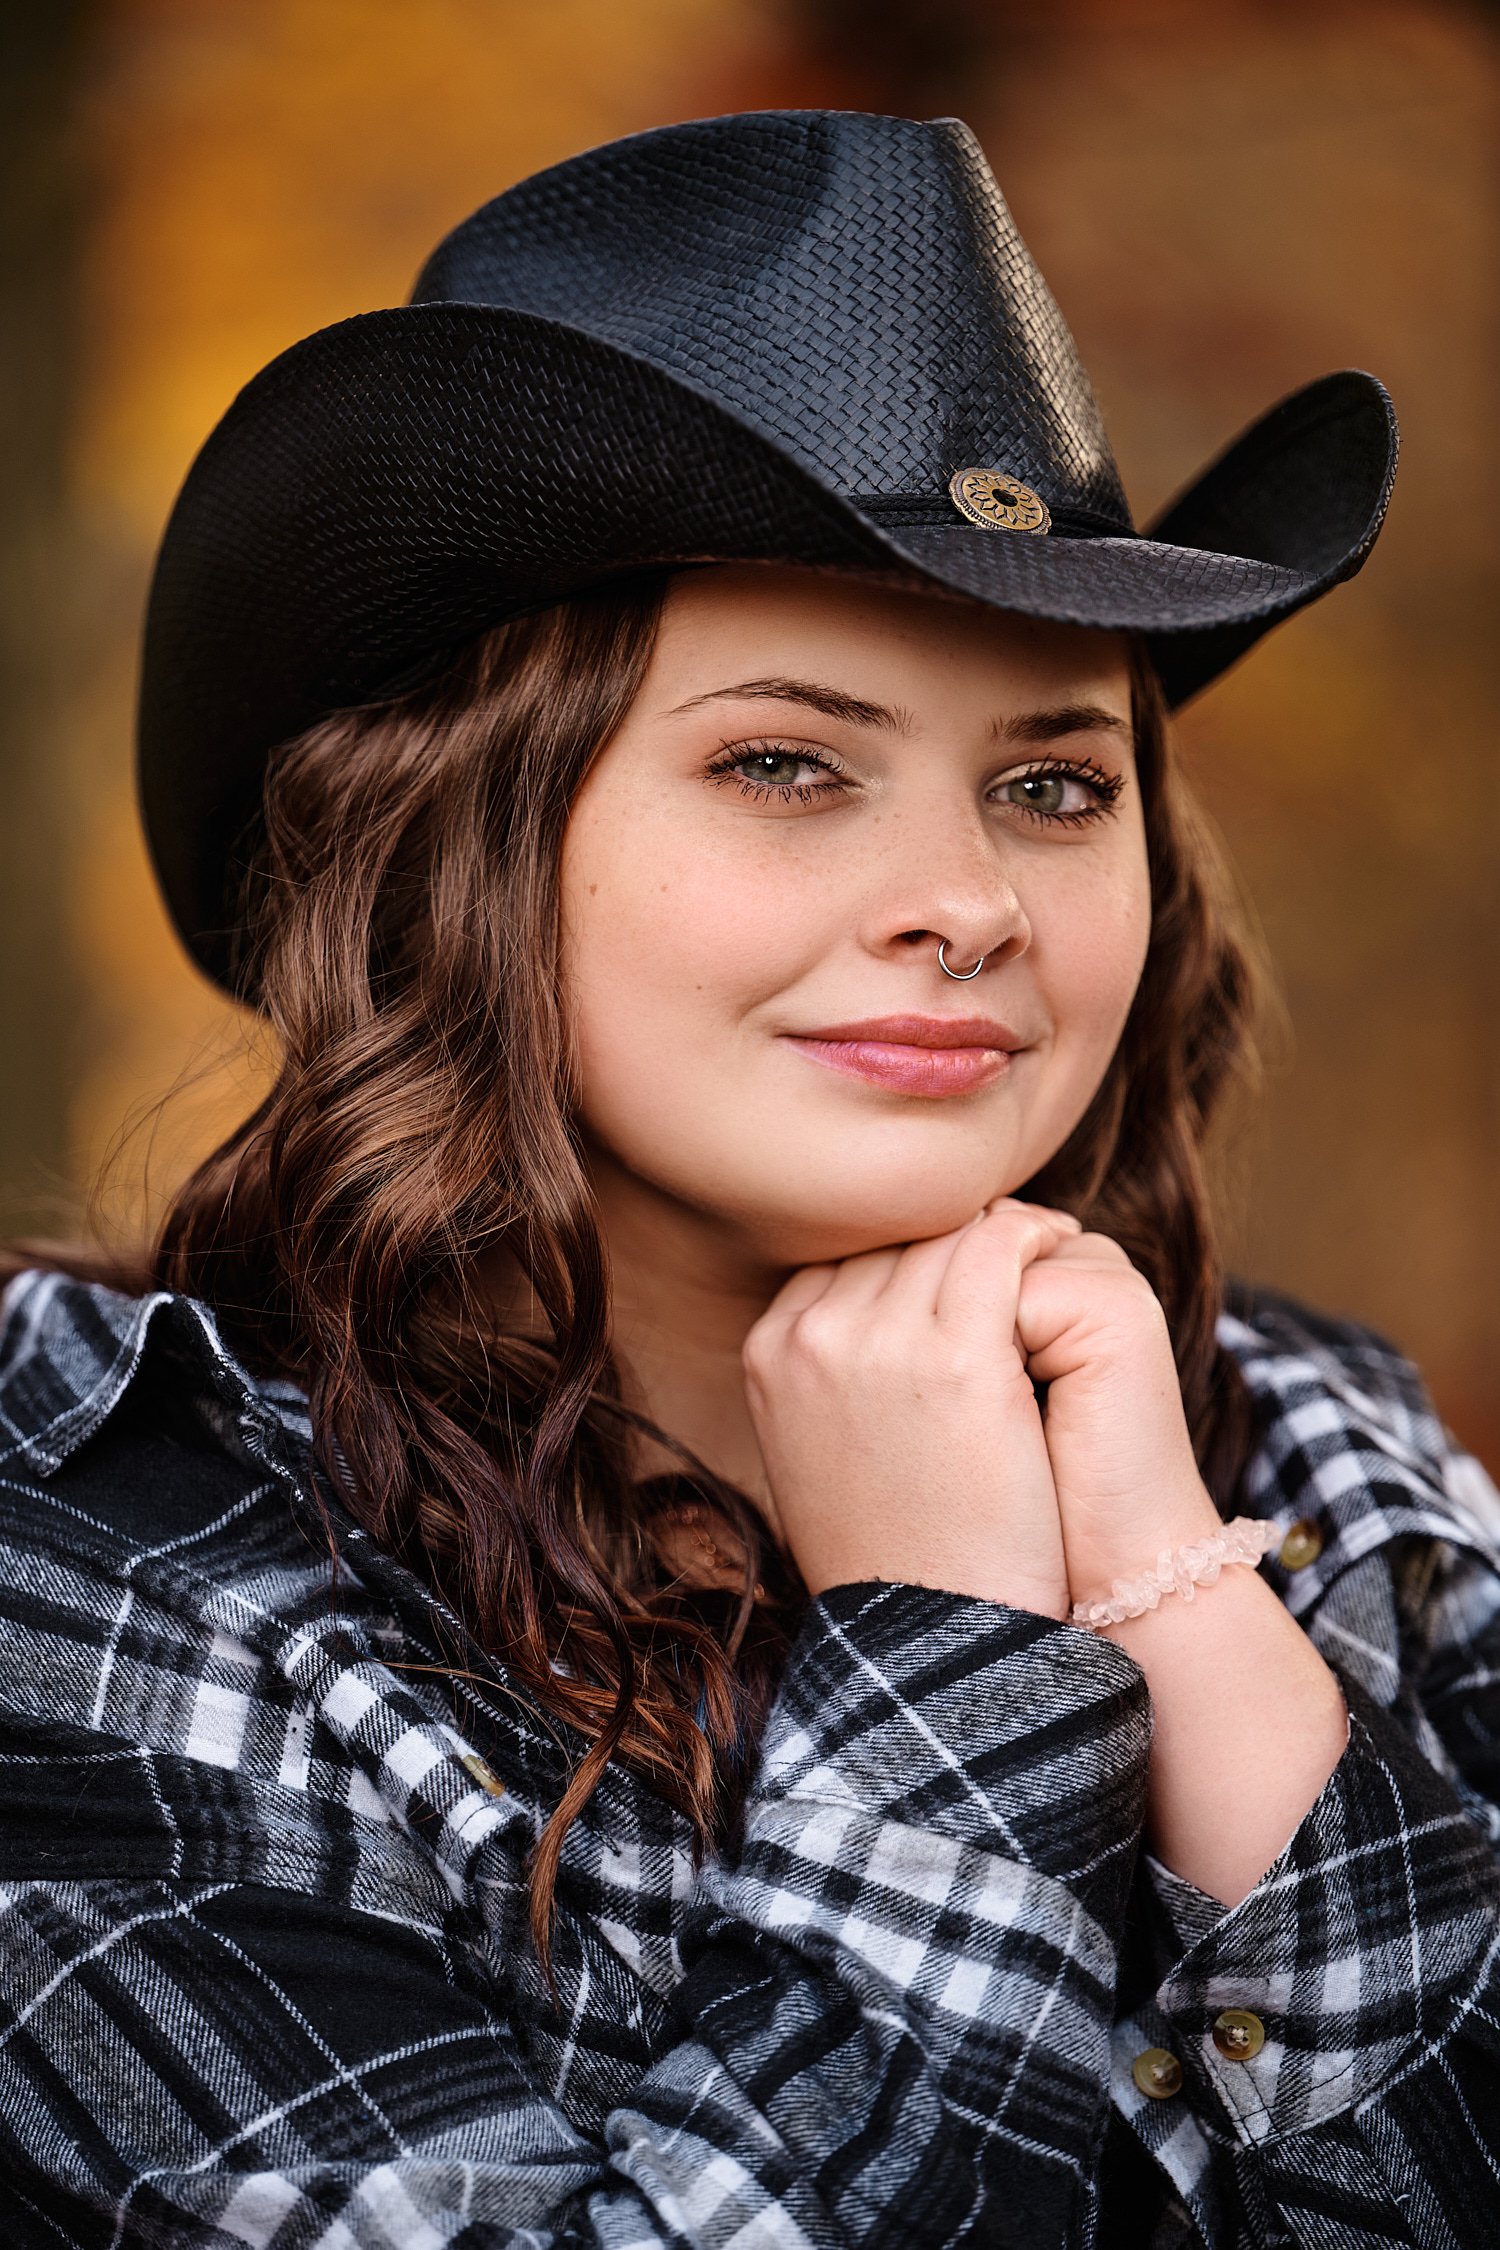  Heavyn Kerr is posing for high school senior portraits with a quarter horse in Hookstown PA. November fall foliage is at its peak with yellow and orange colors all around the beautiful teenage girl. 